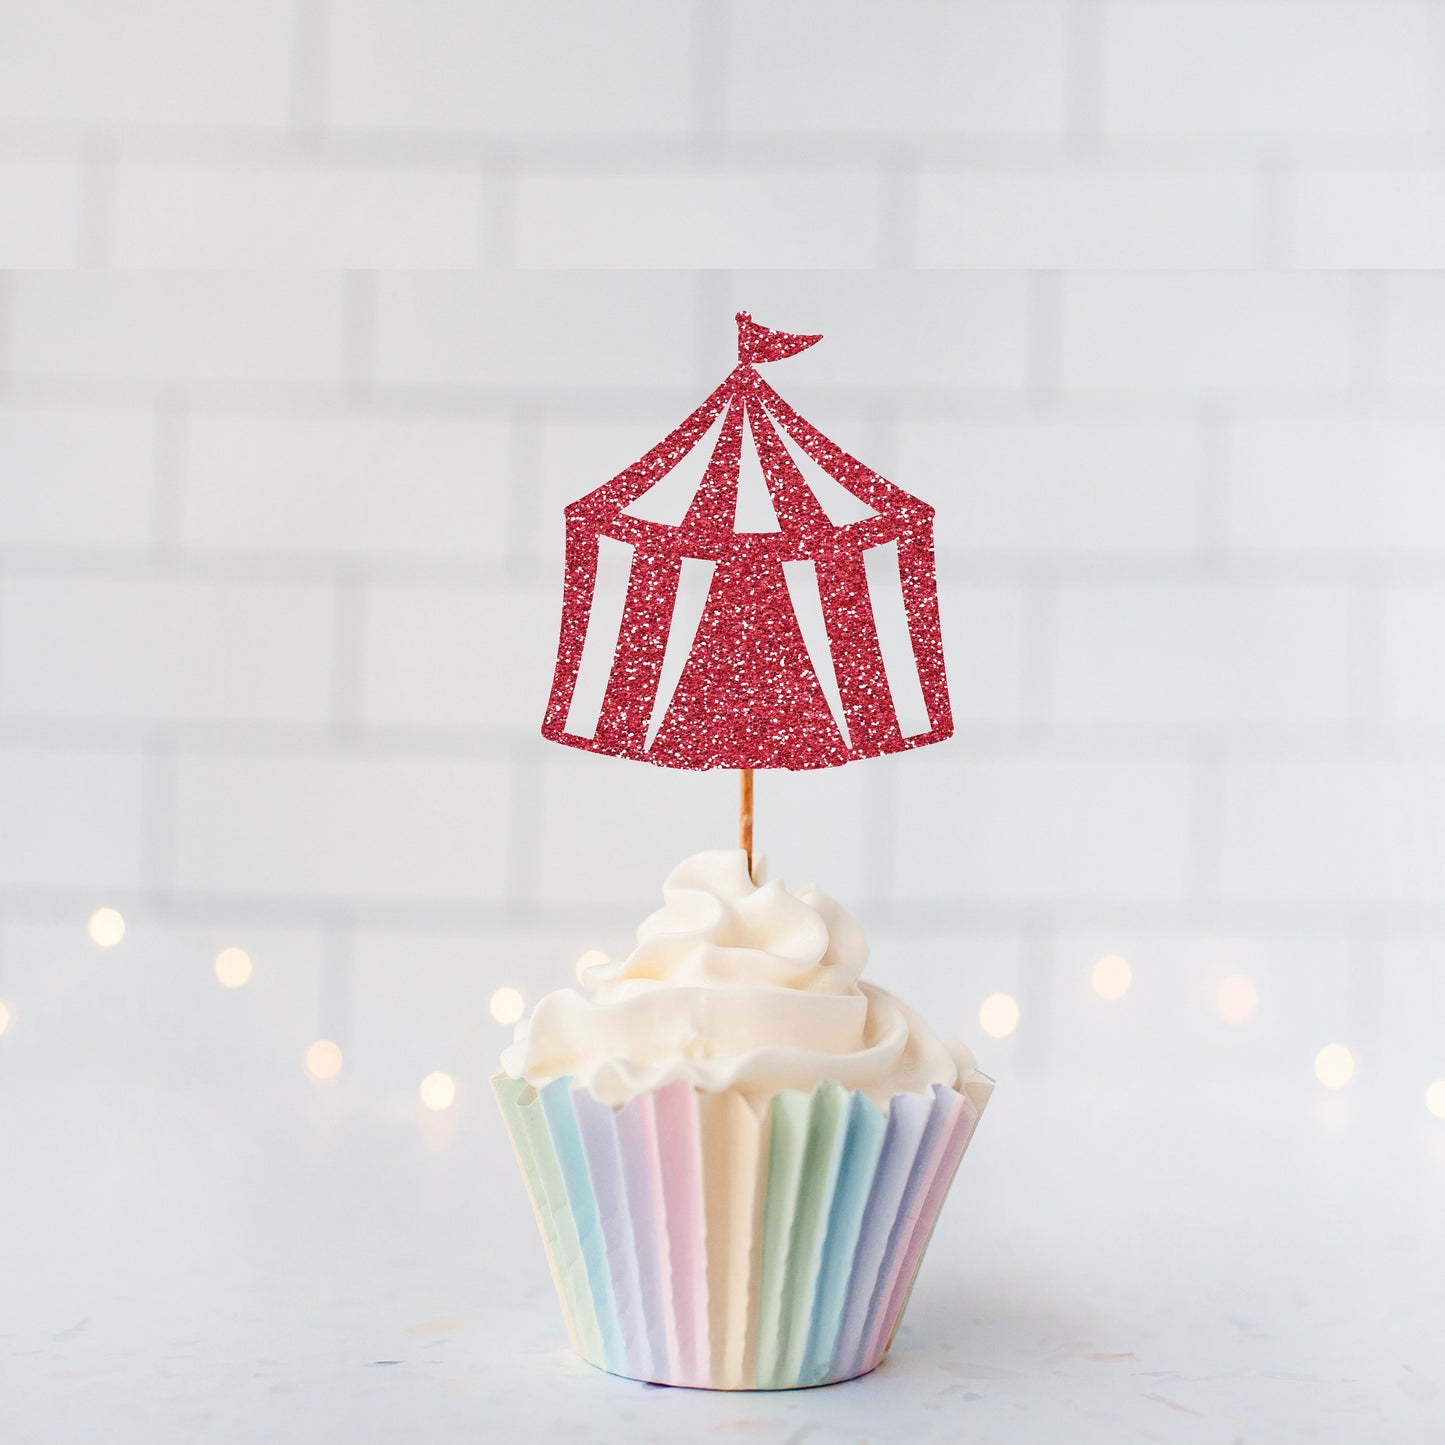 Glitter Circus Tent Cupcake toppers